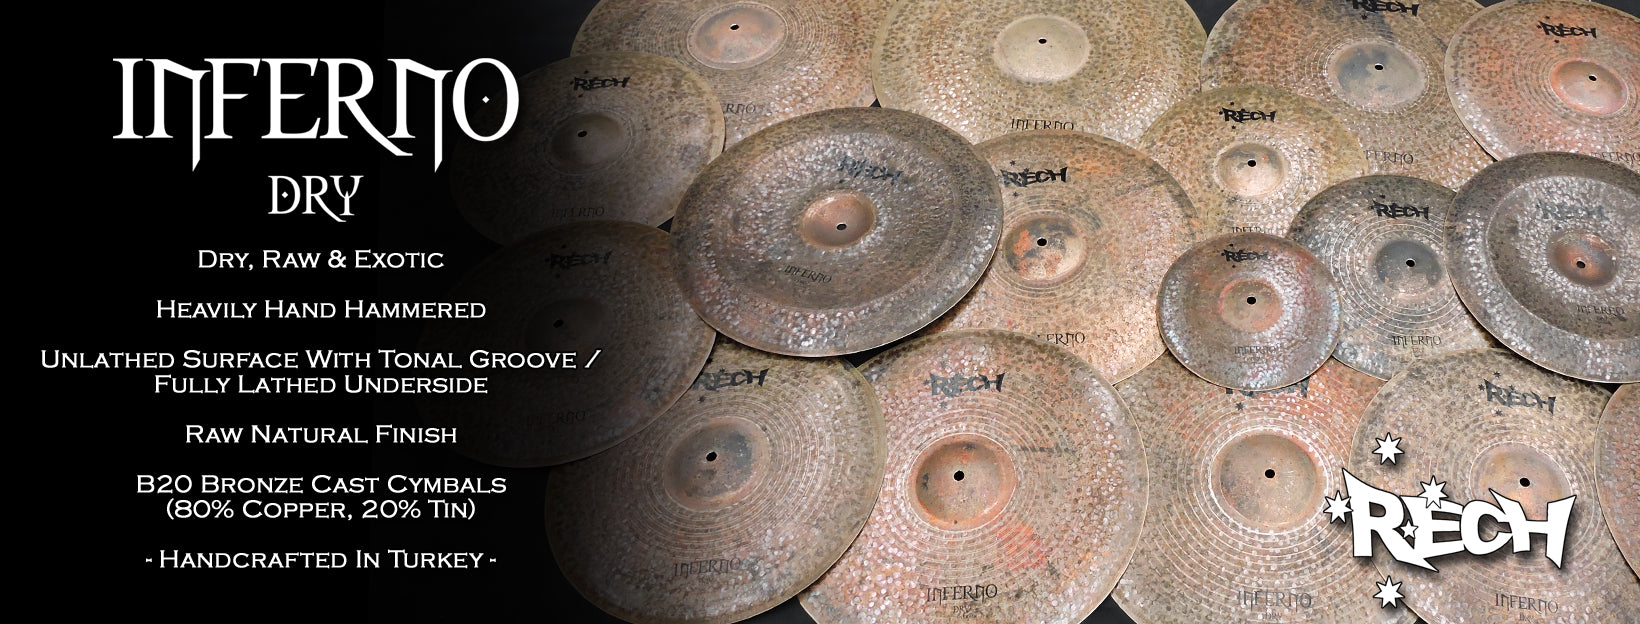 Rech Inferno Dry Cymbals